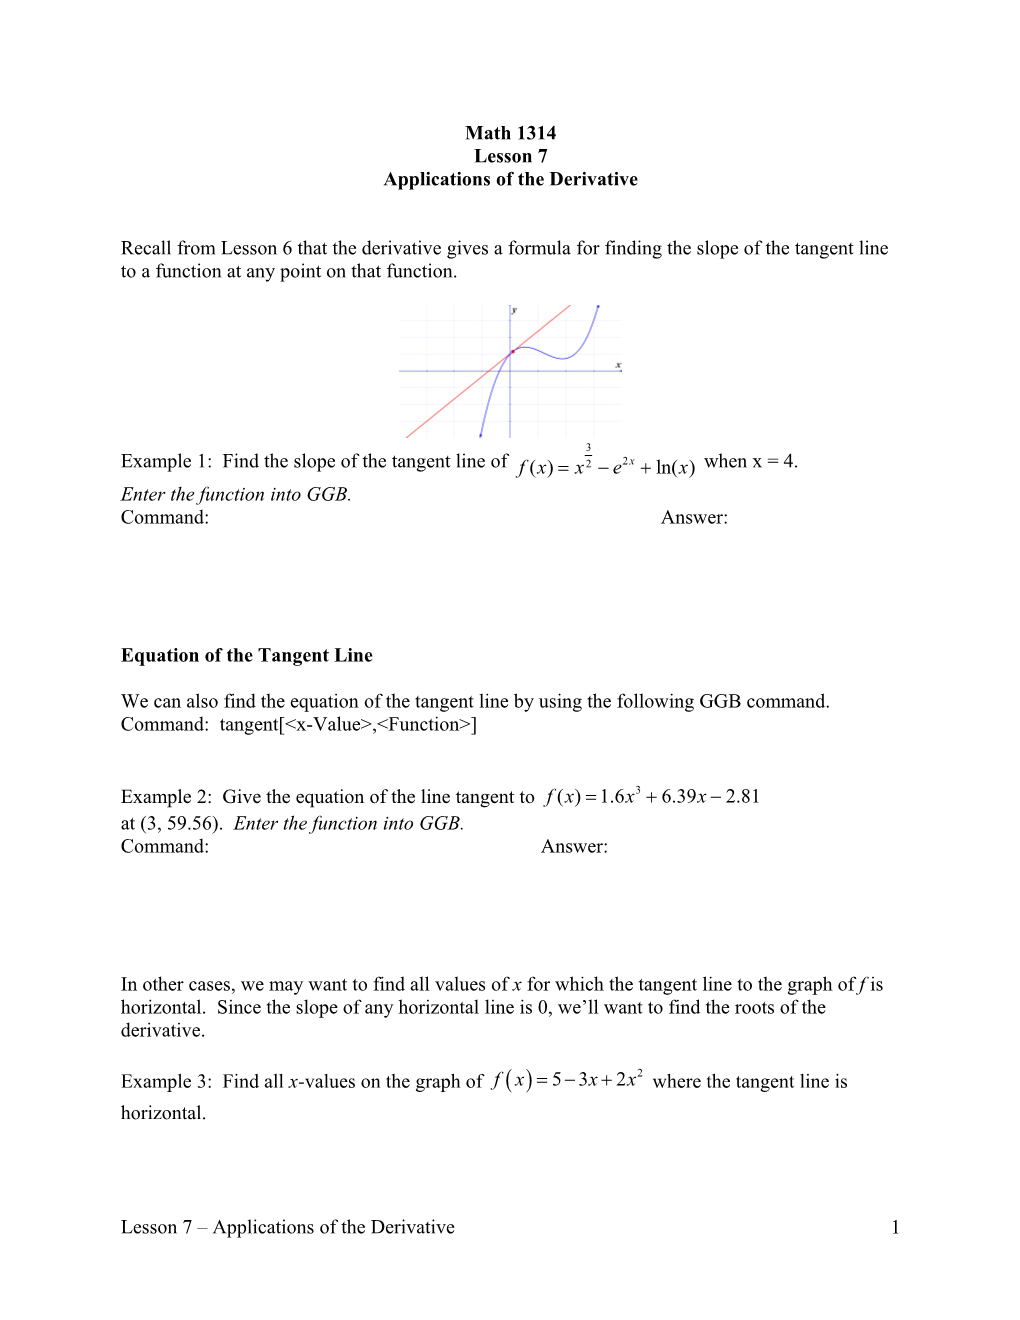 Lesson 7 Applications of the Derivative